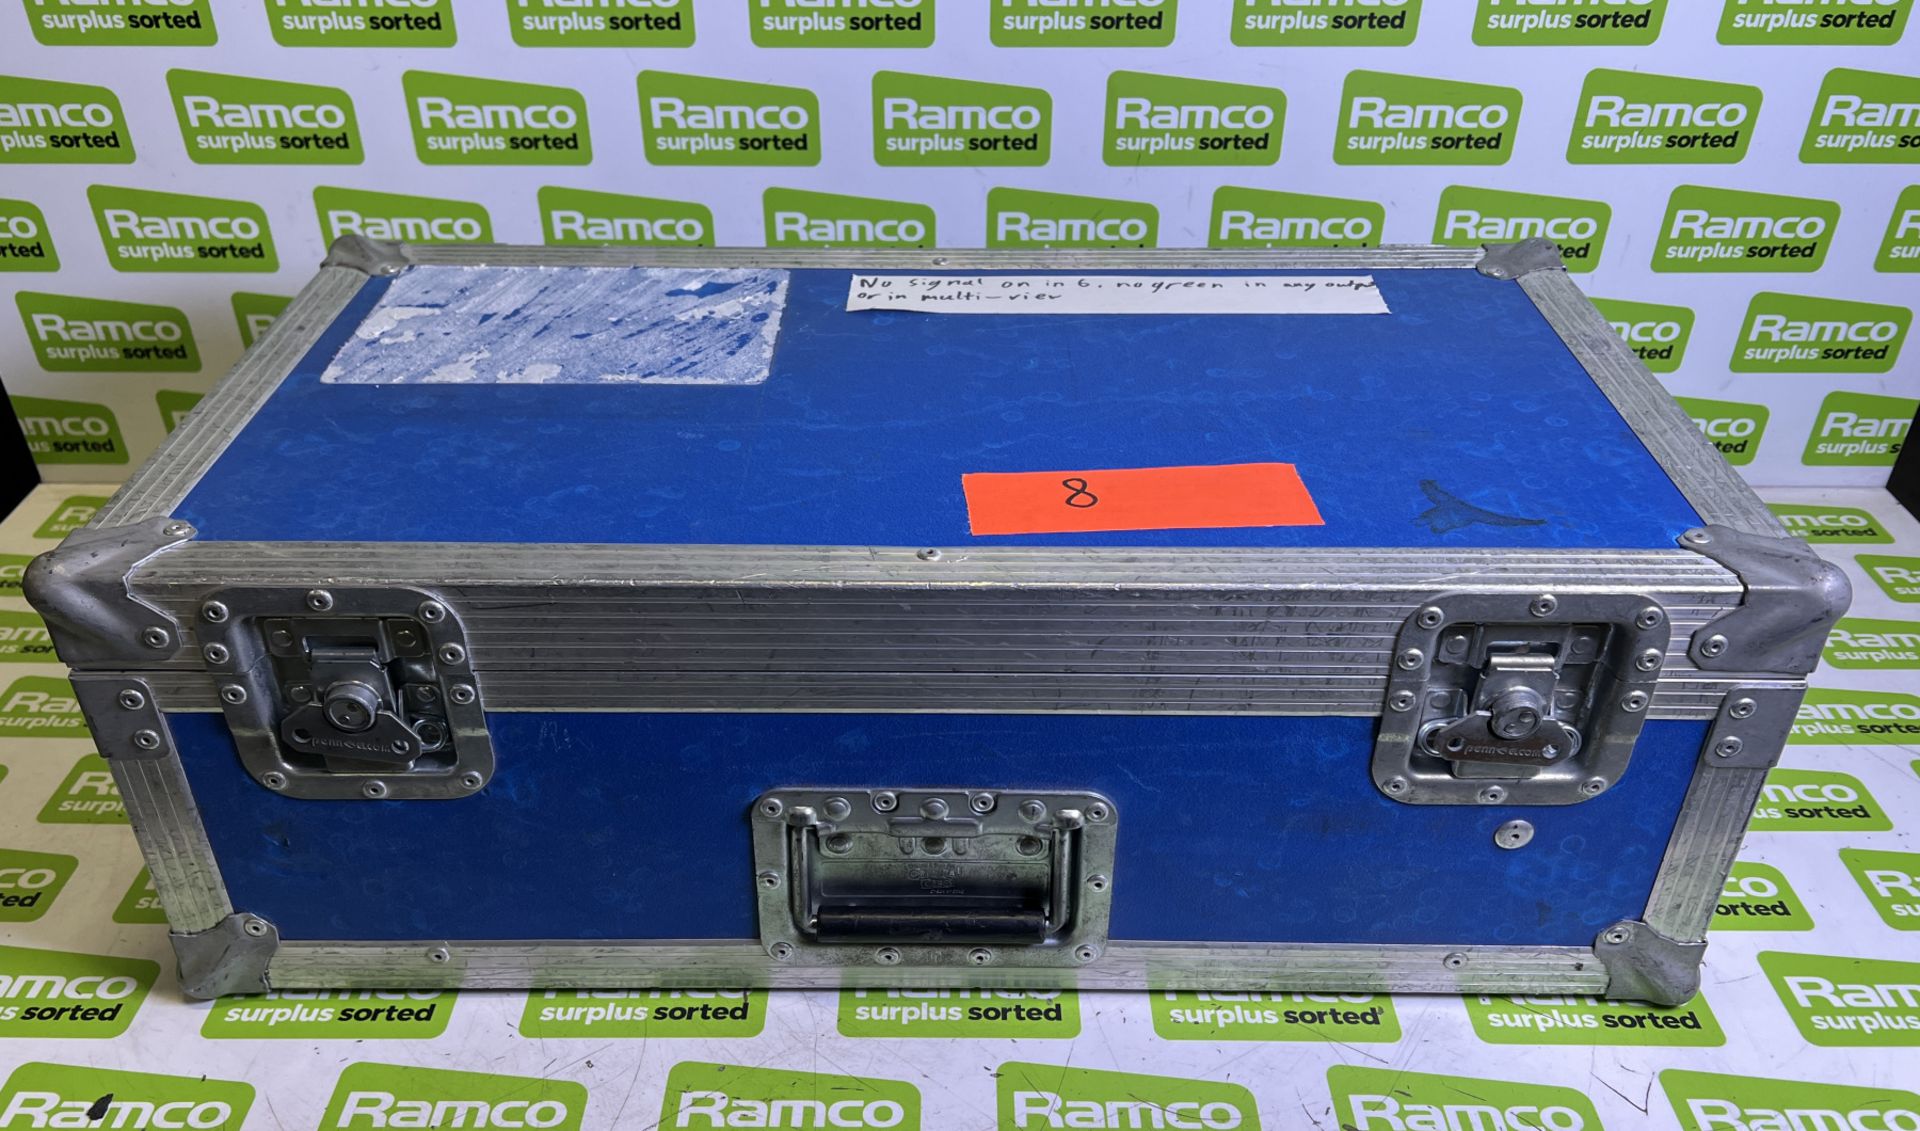 Roland V800HD vision mixer in flight case - case dimensions: L 690 x W 370 x H 230mm - FAULTY OUTPUT - Image 10 of 10